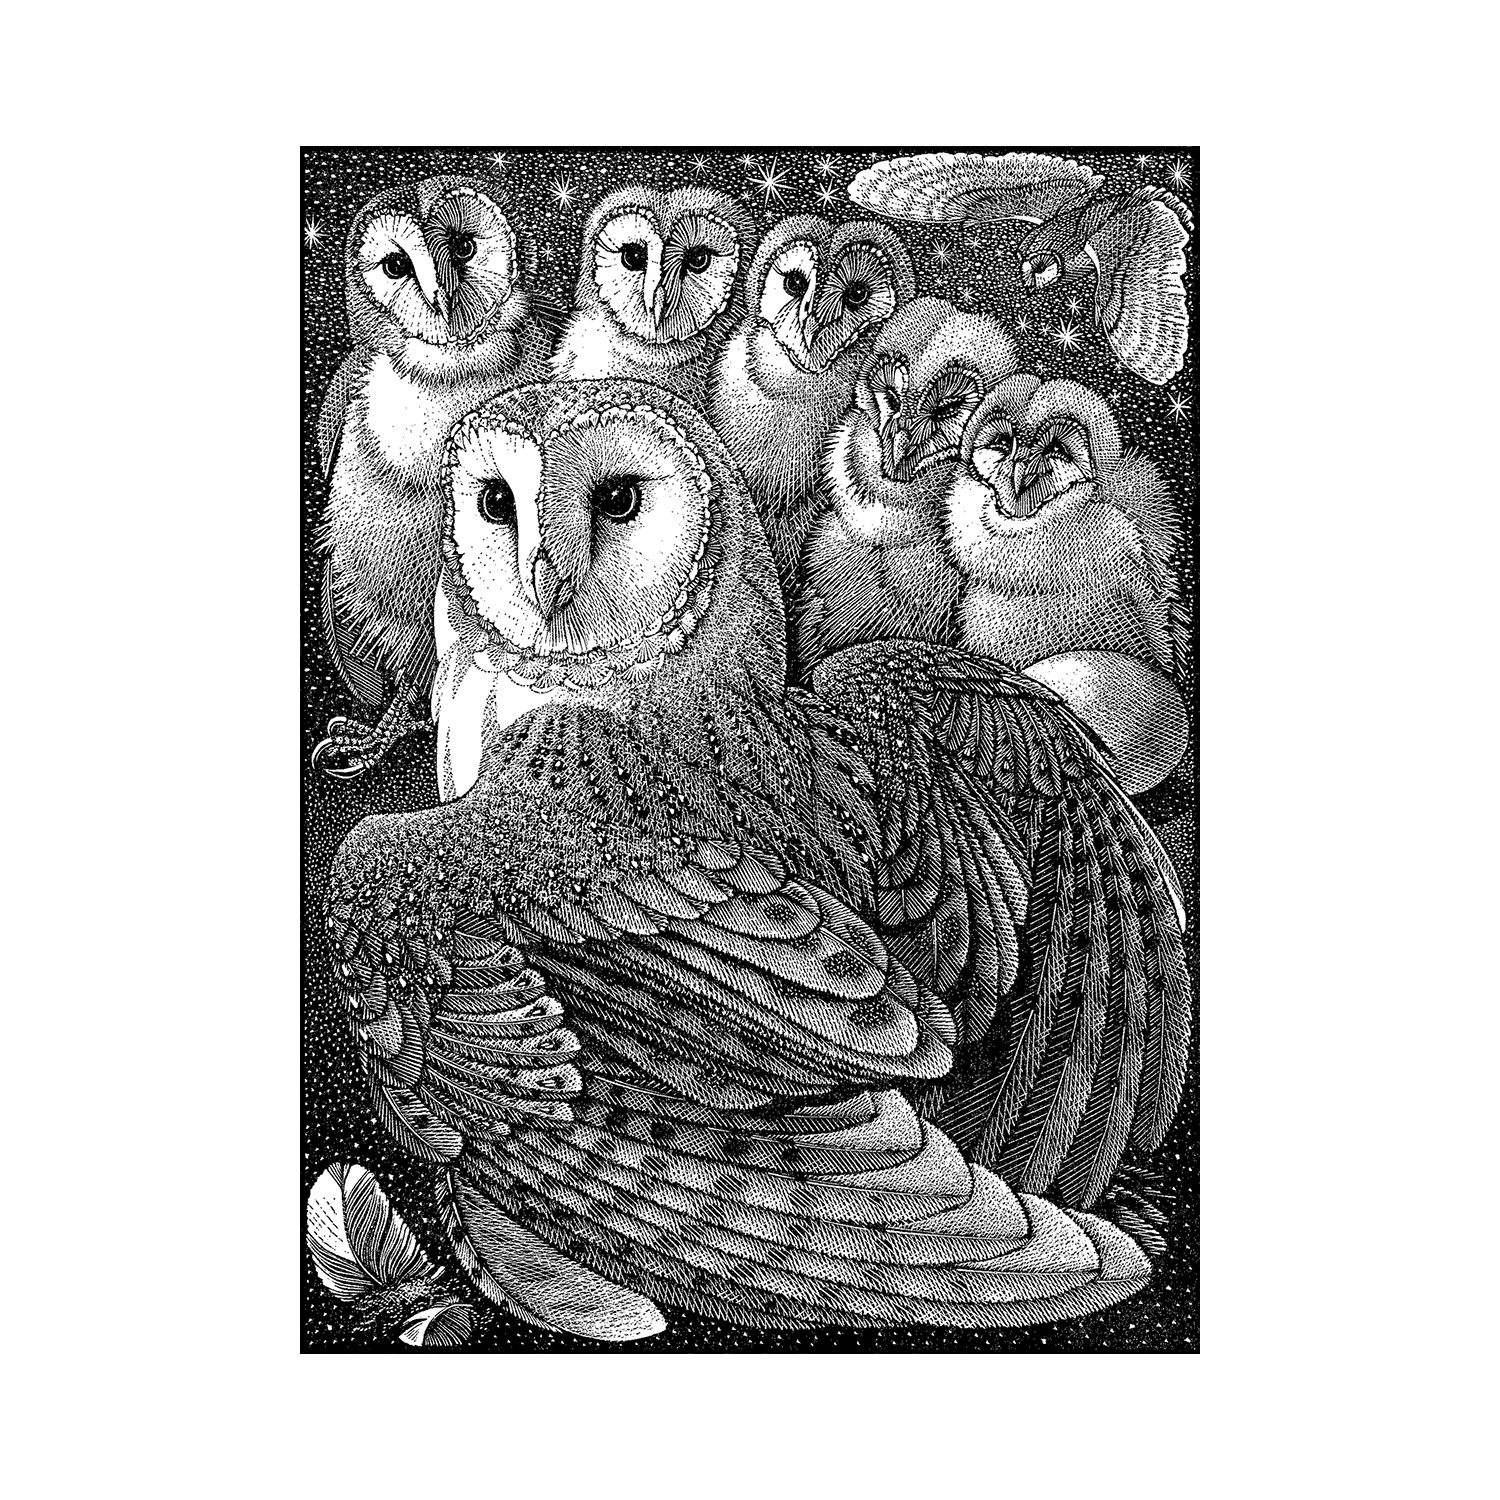 Parliament of Owls by Colin See-Paynton